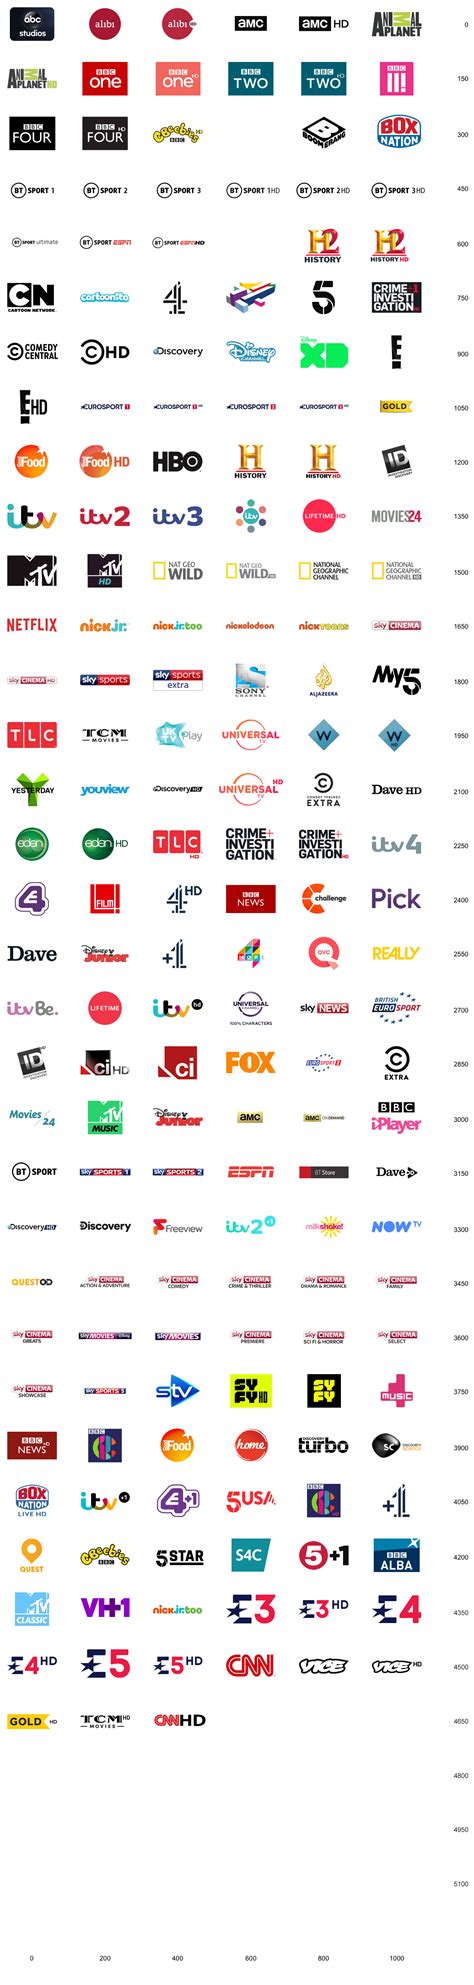 Bt Tv Channels And Shows Bt